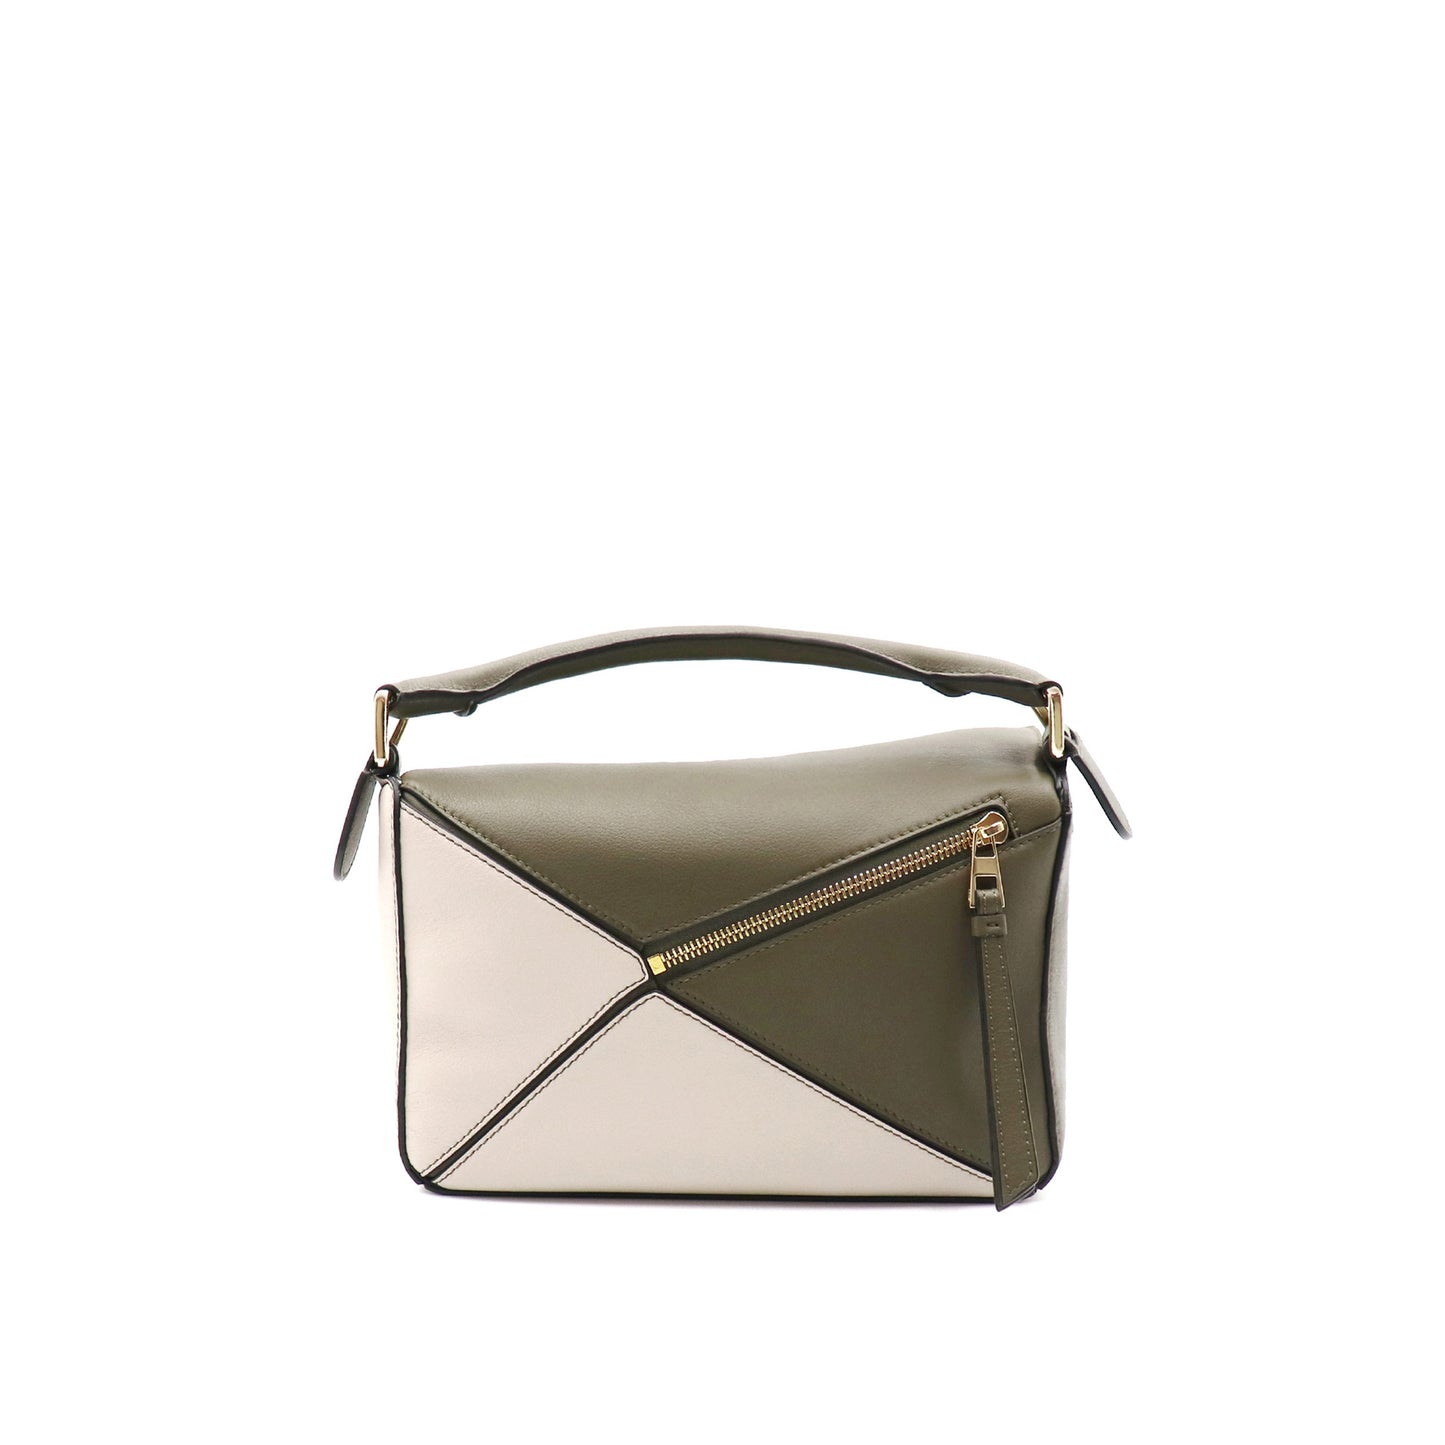 Small Puzzle Bag in Classic Calfskin in Green/Light Oat